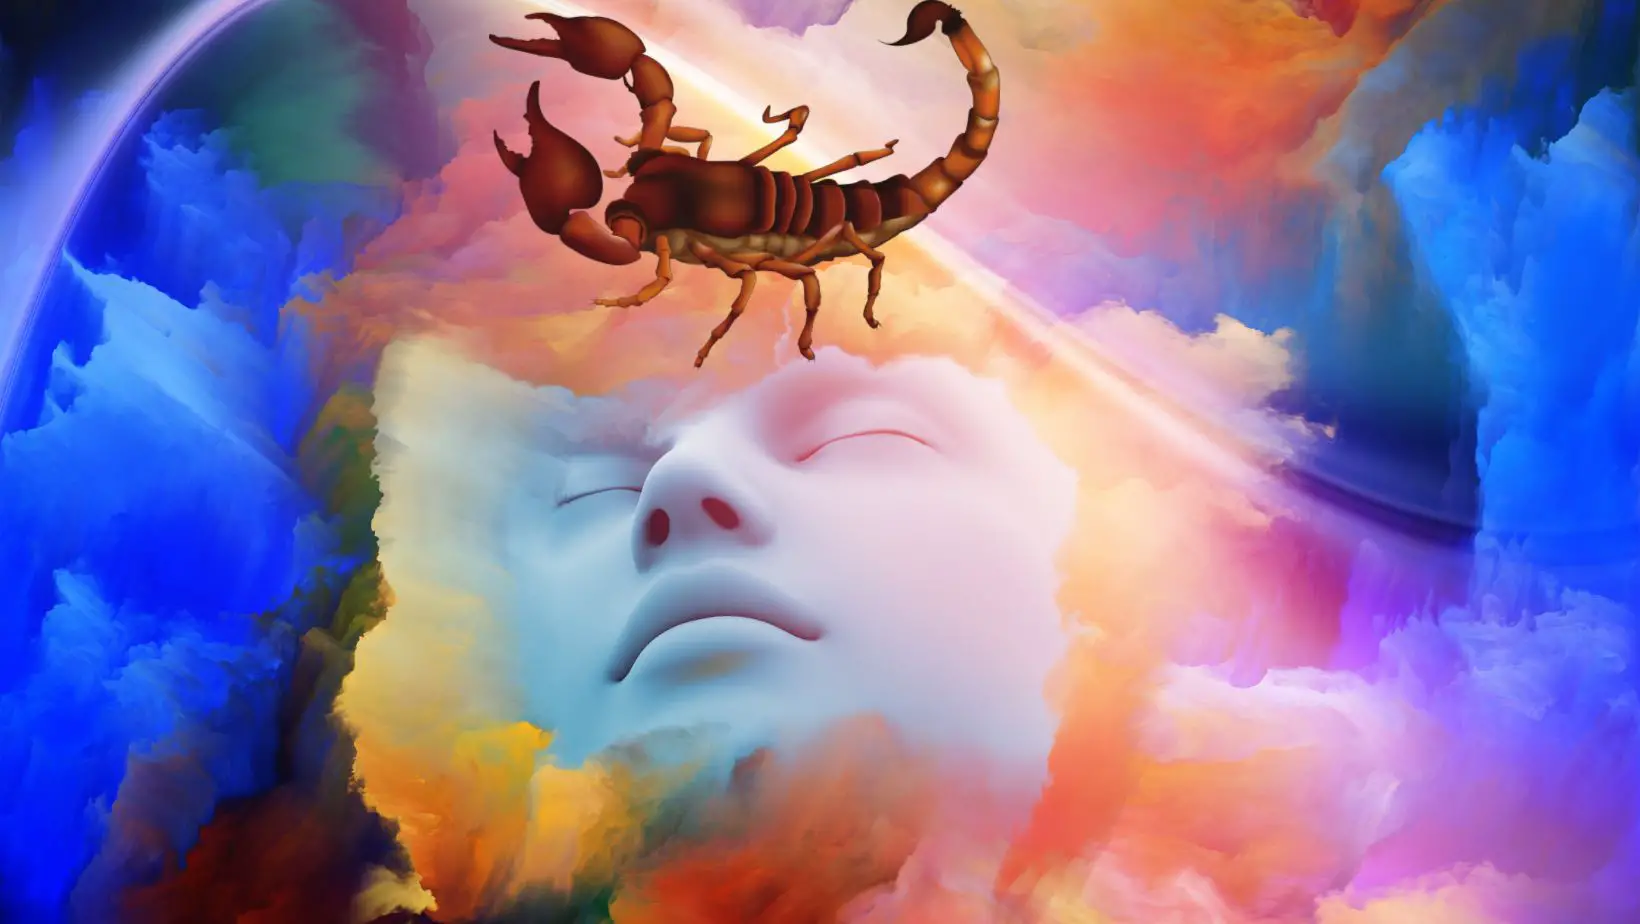 Scorpions in Dreams Meaning